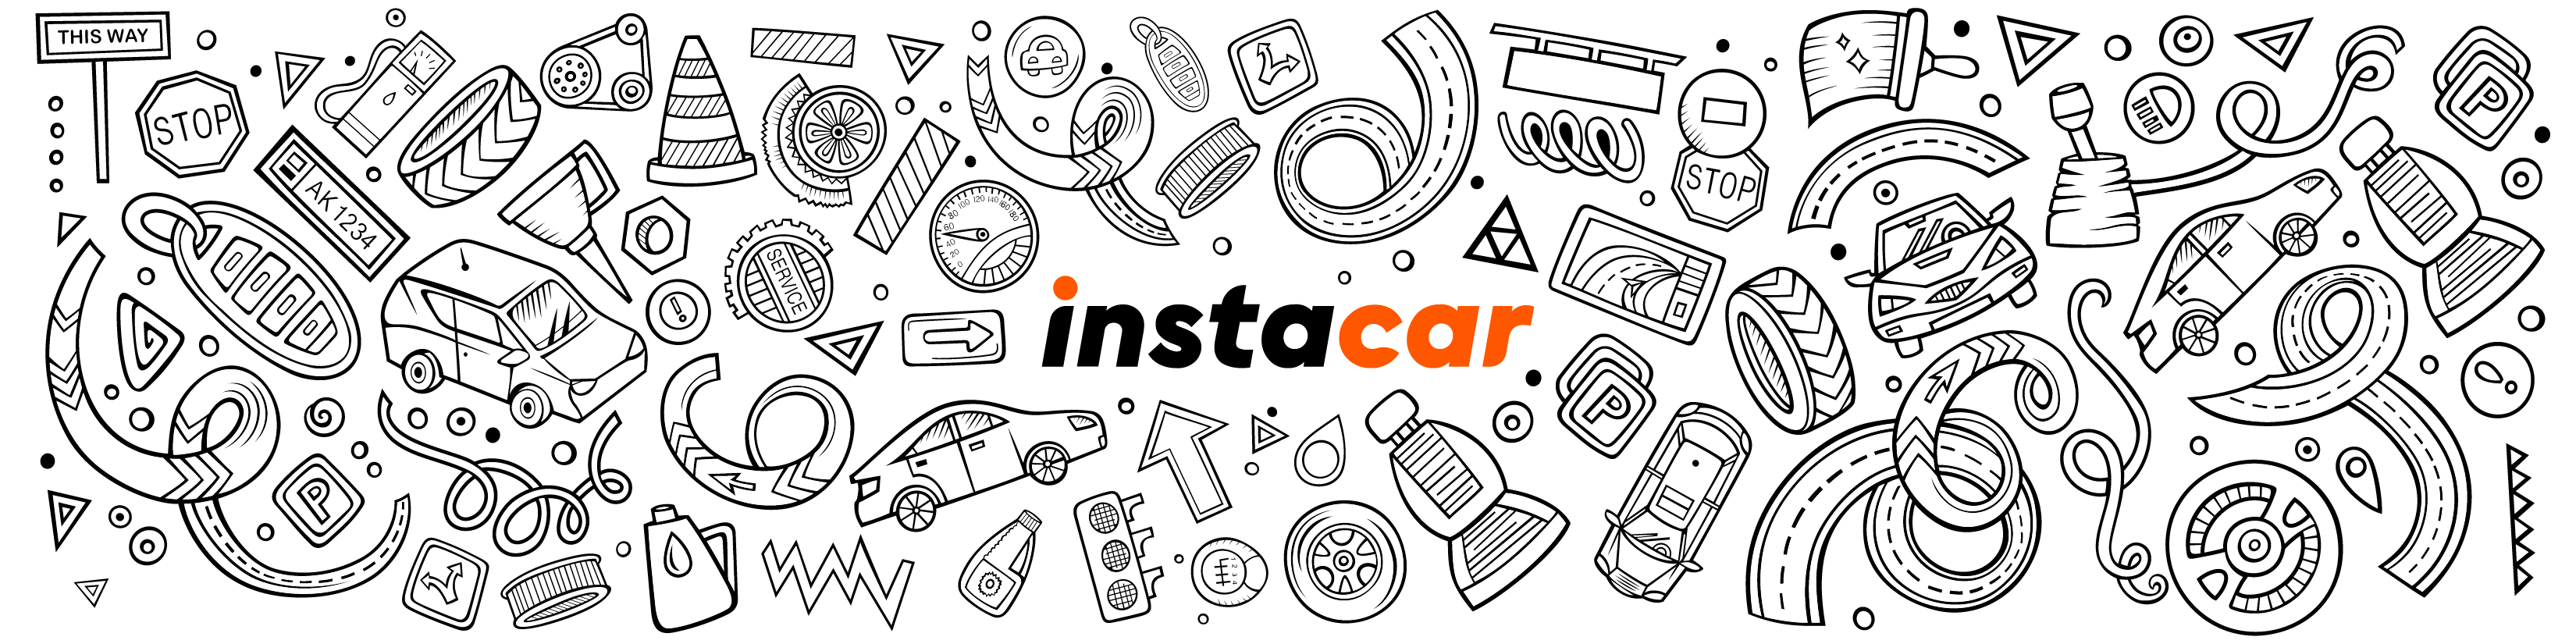 <strong>Greek startup Insacar raises €55 million in funding</strong>